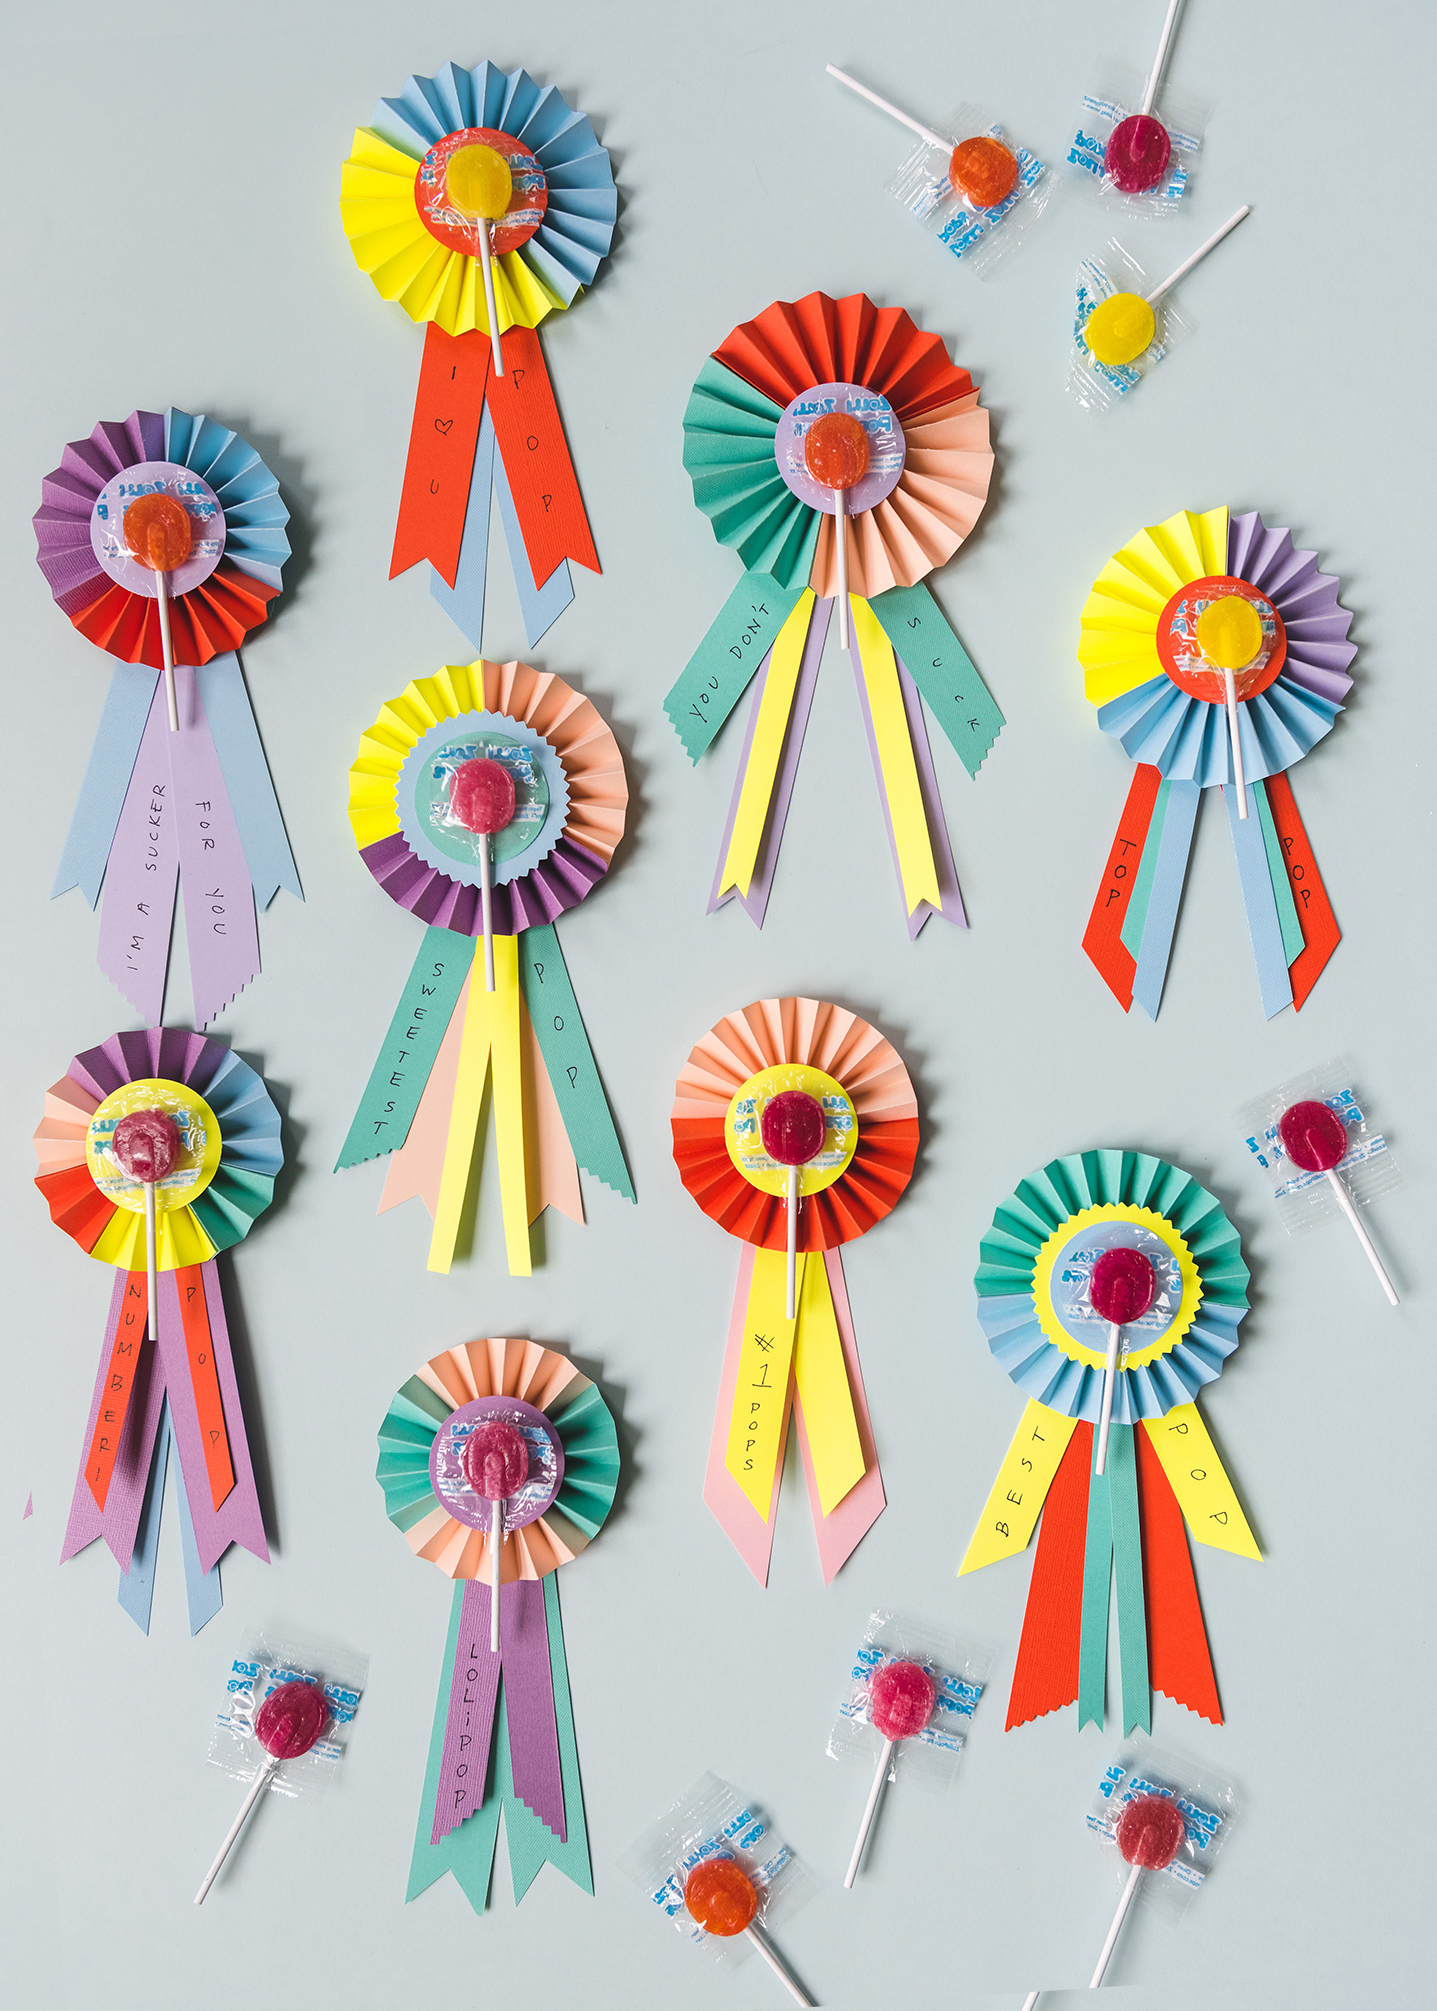 LolliPOP Father's Day prize ribbons